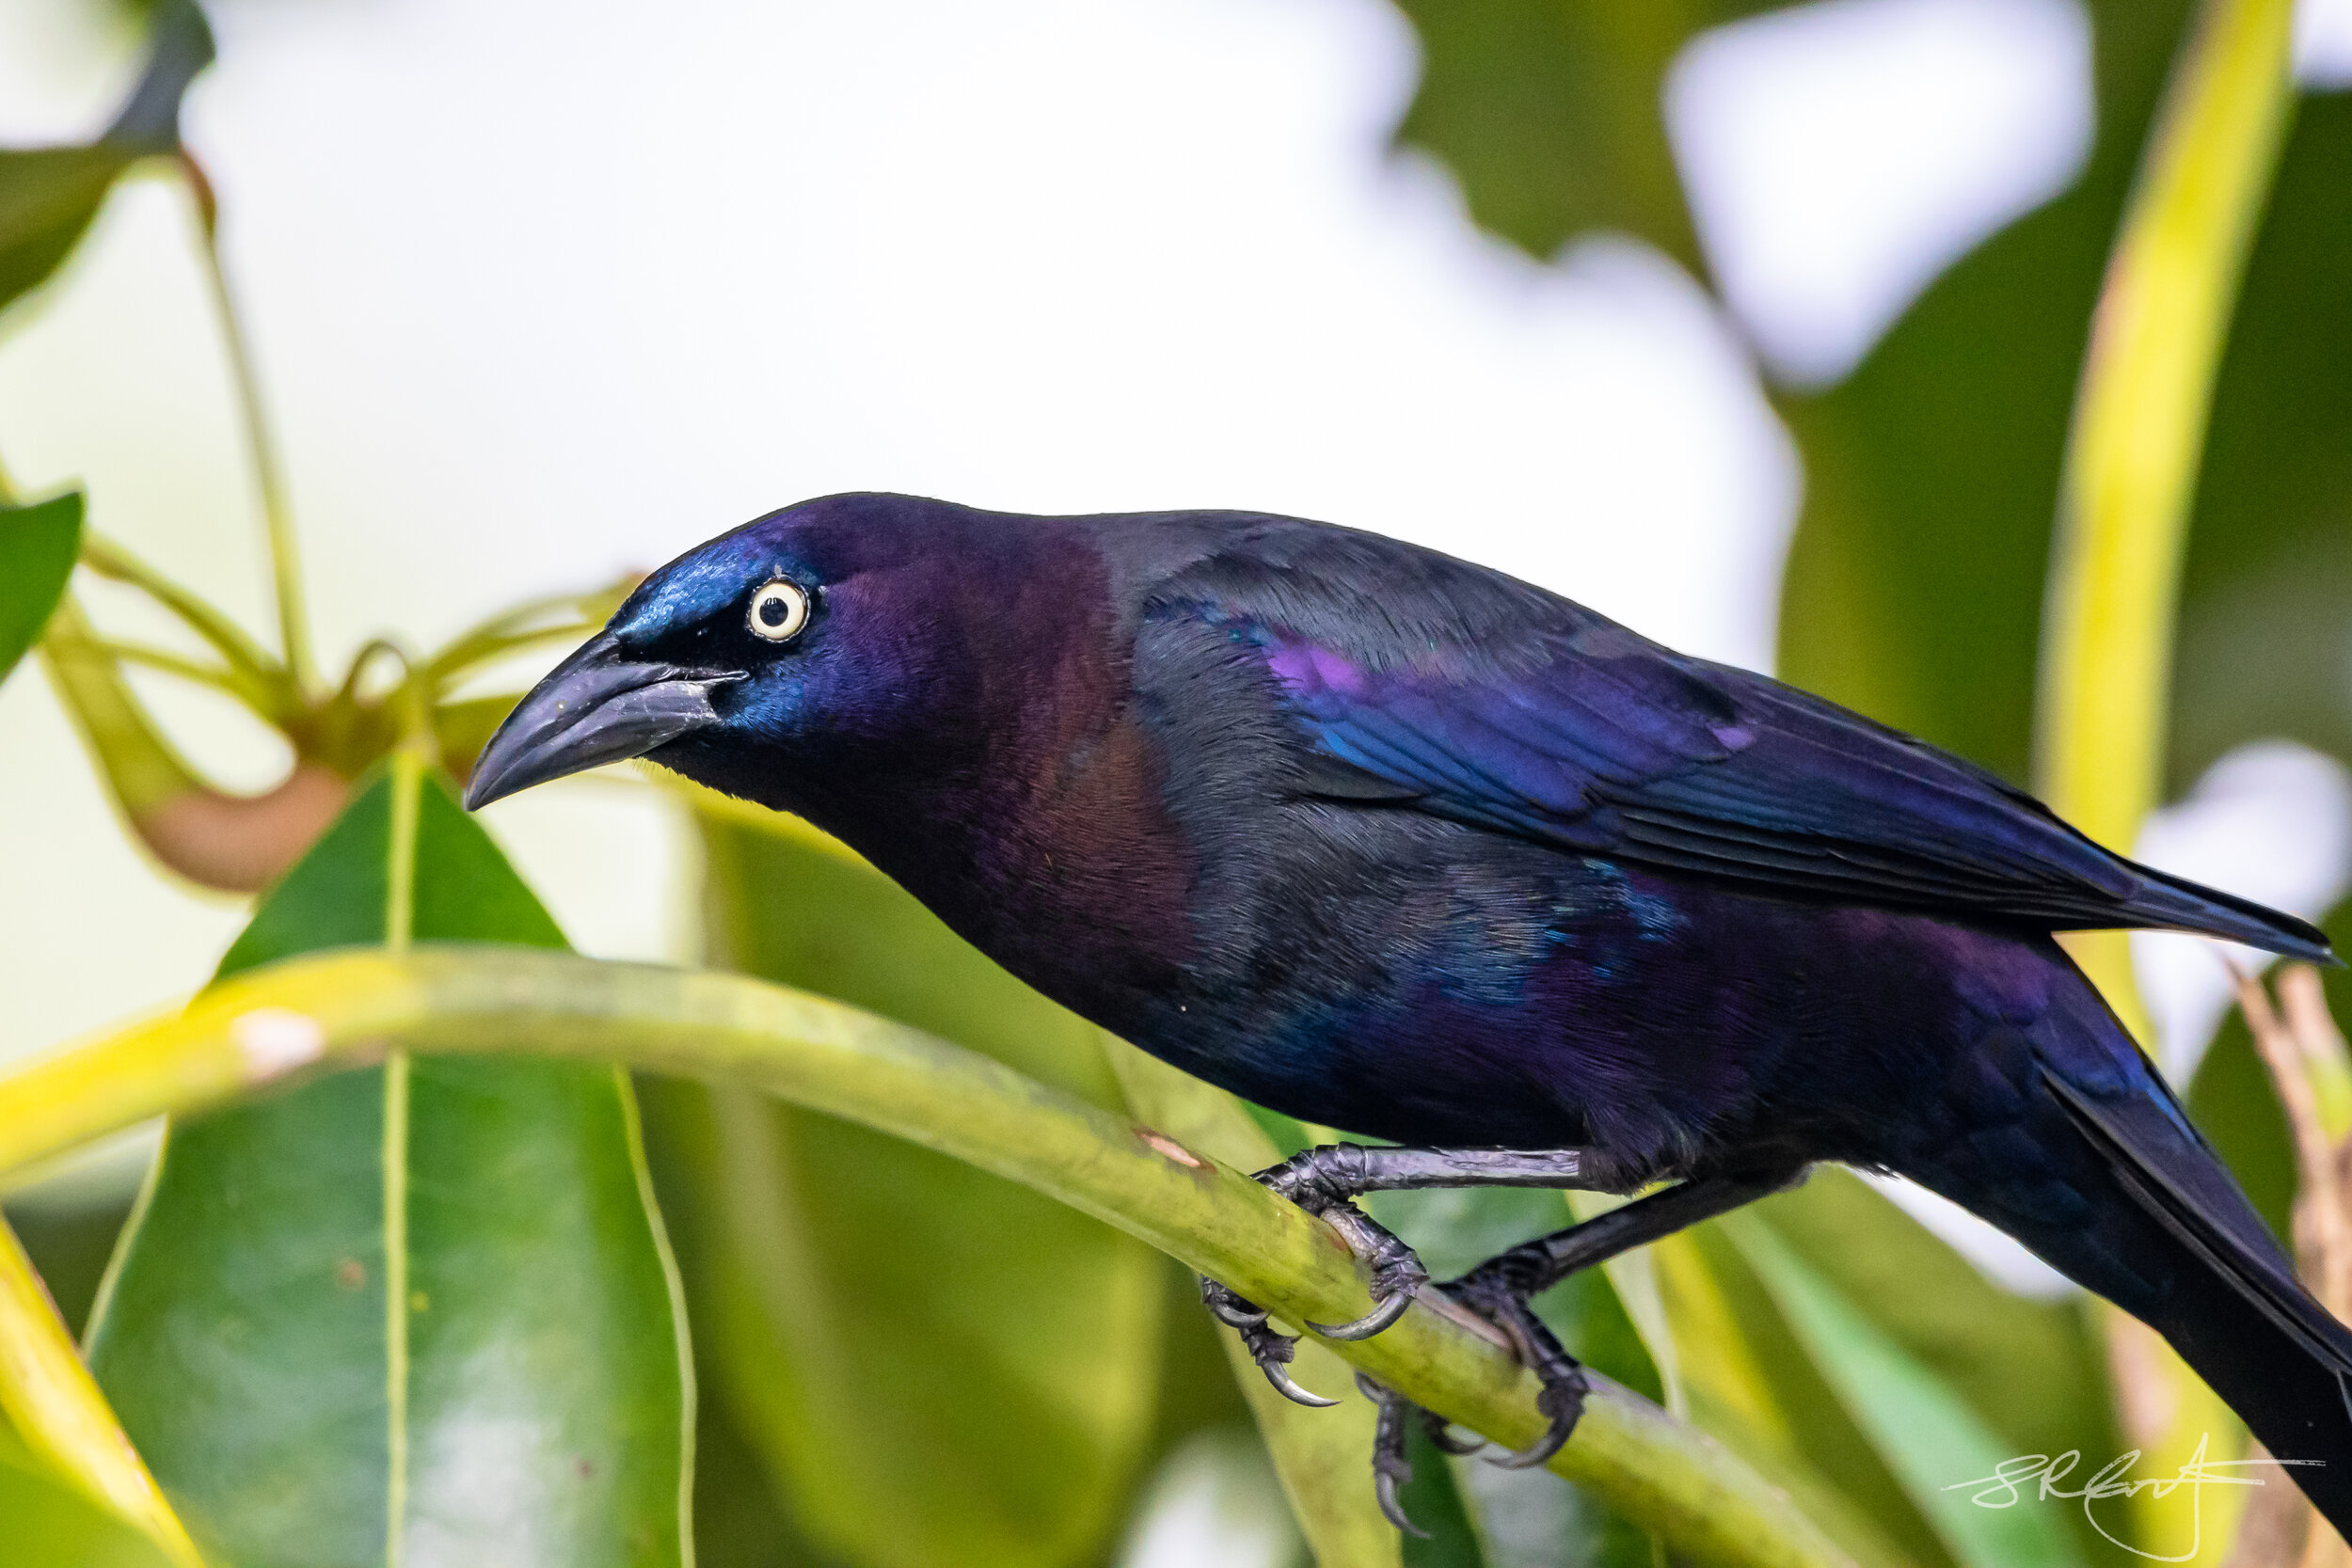 The Iridescent Male Grackle